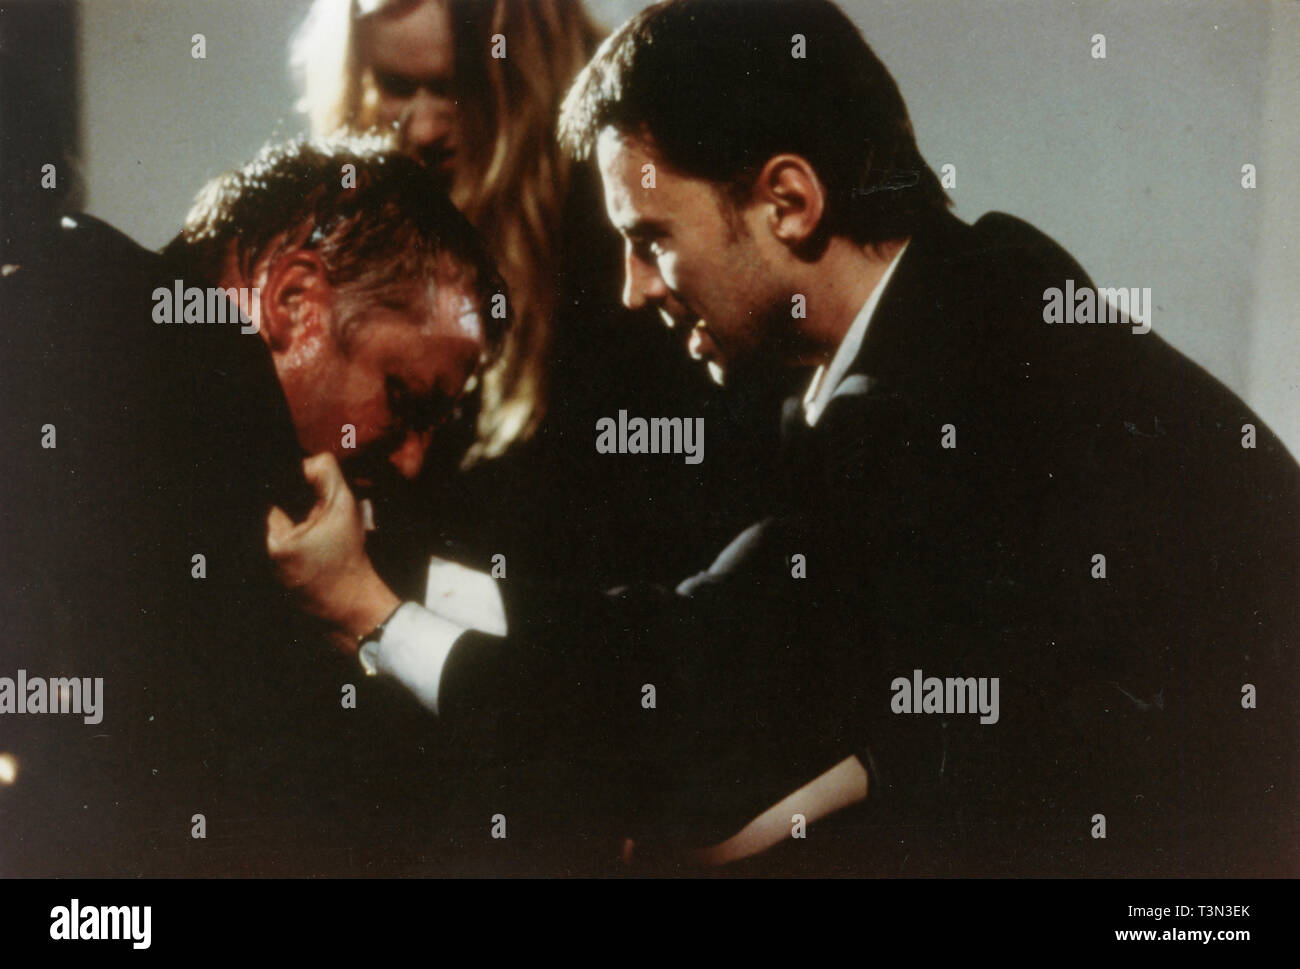 Actors Robert Carlyle and Ray Winstone in the movie Face, 1990s Stock Photo